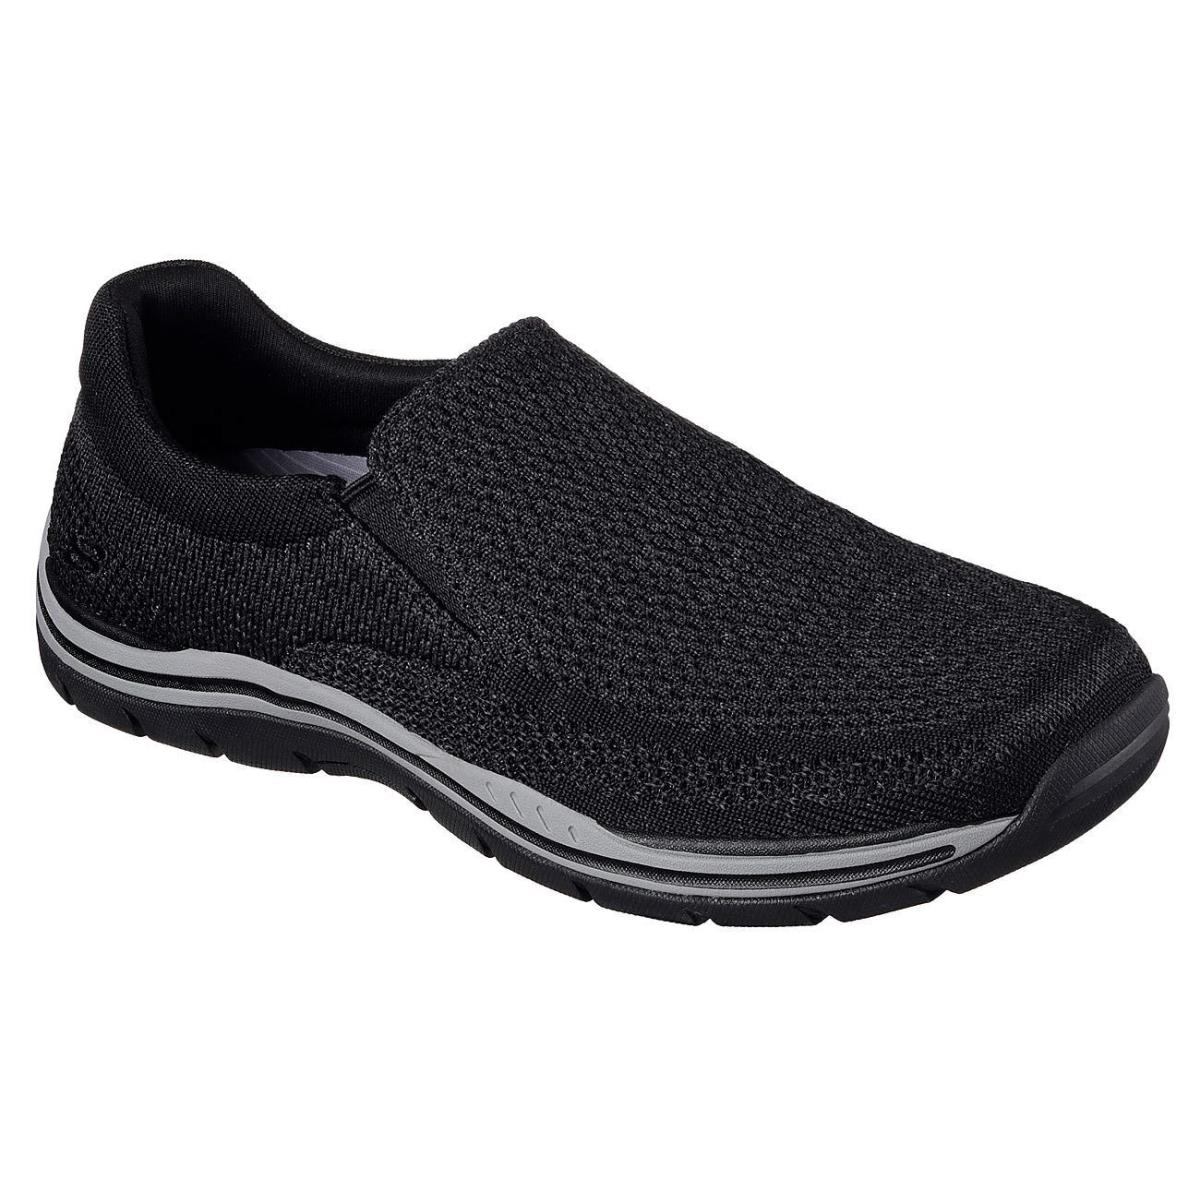 Men`s Skechers Relaxed Expected Gomel Loafer Shoes 65086 /blk Sizes 8-14 Black